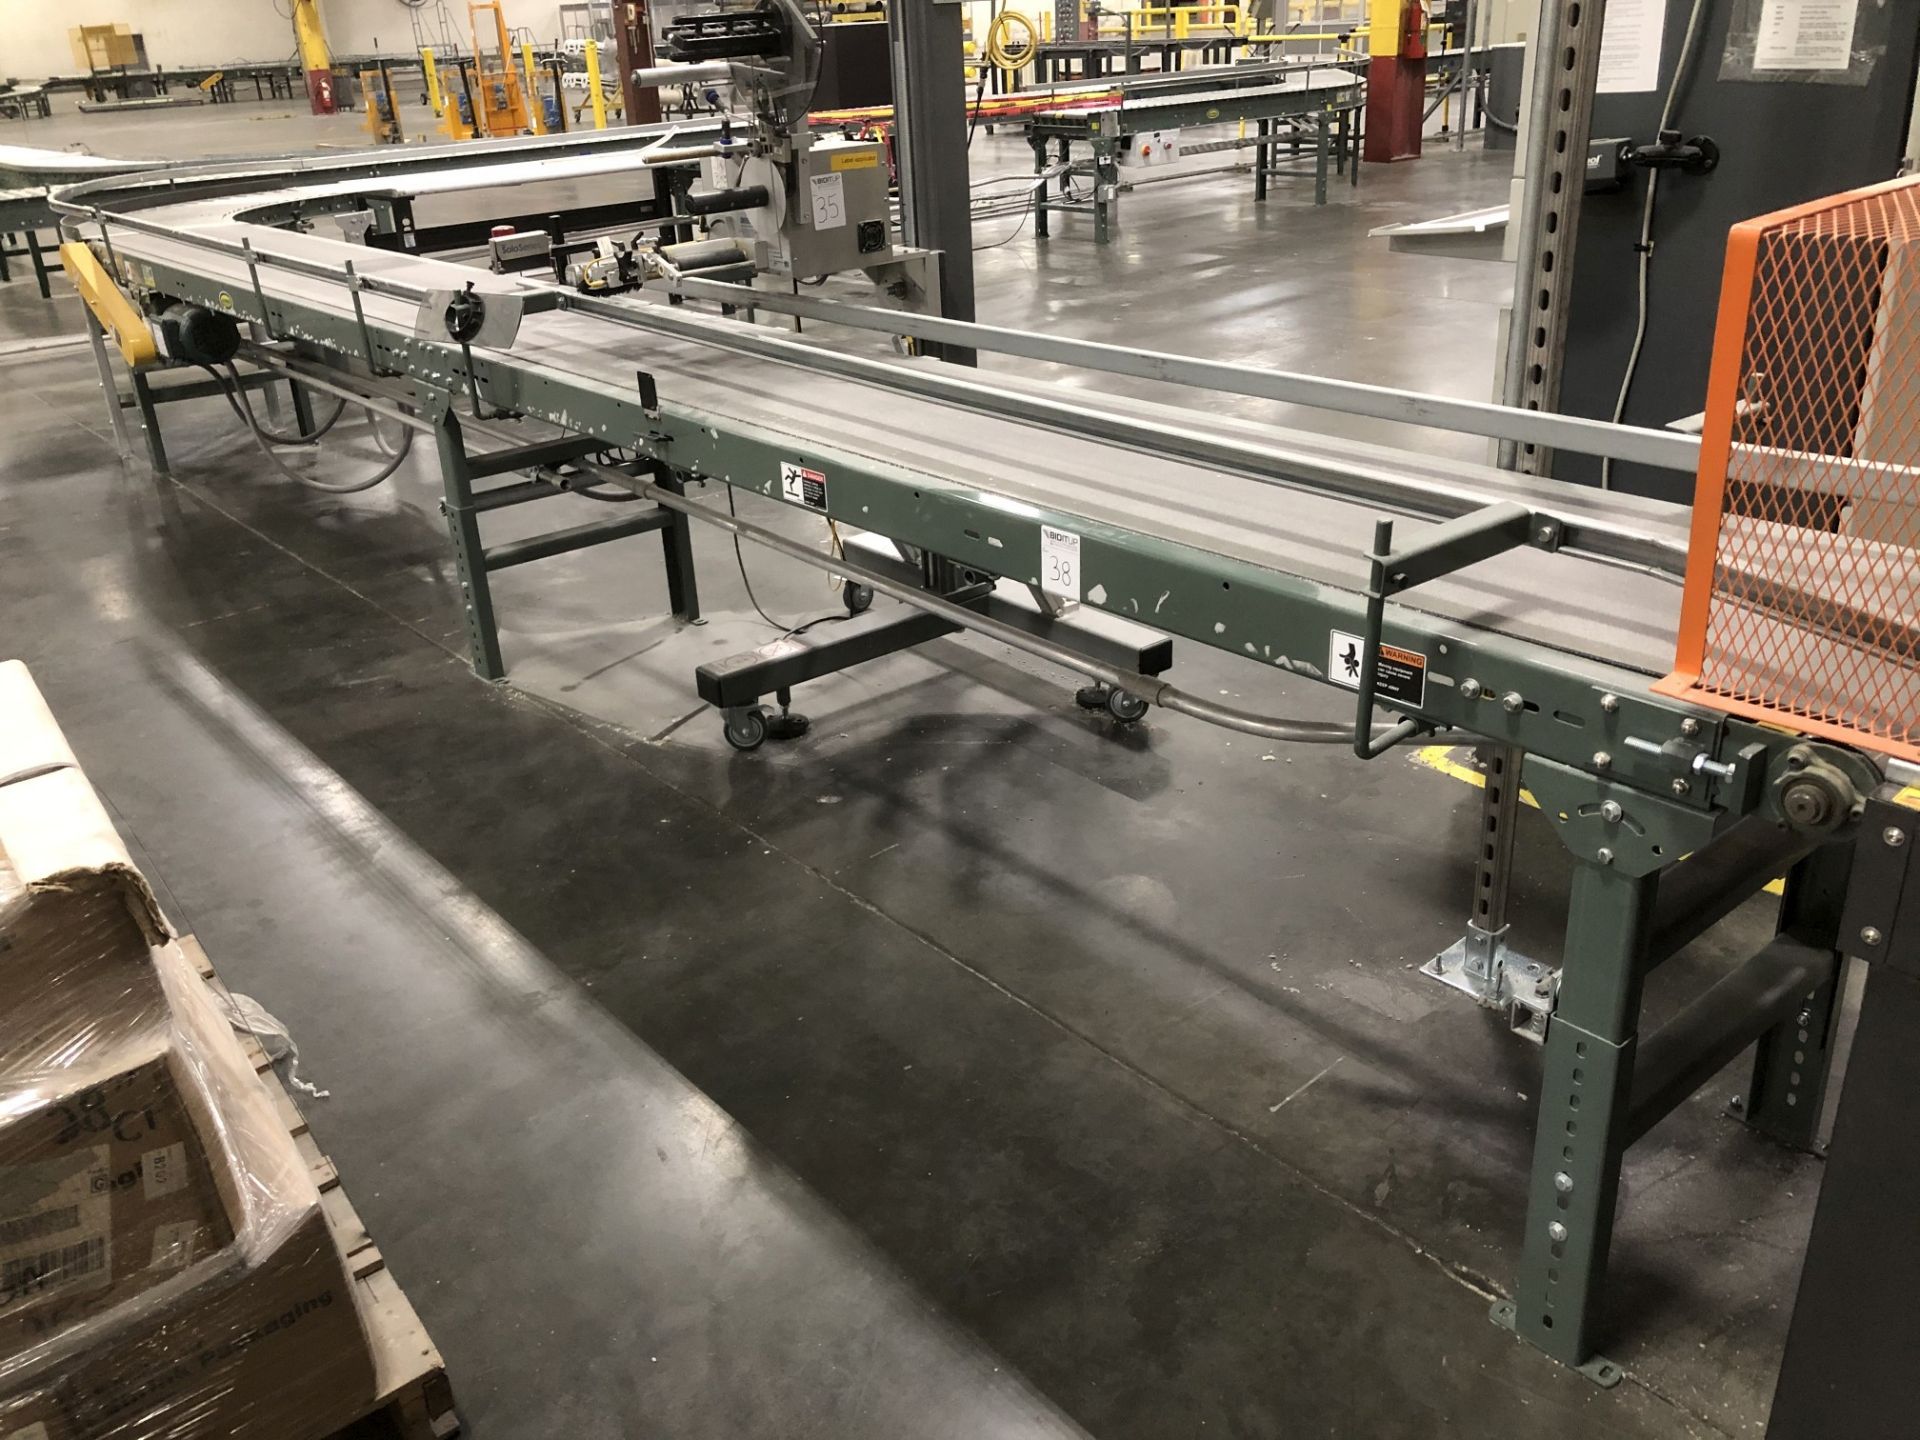 All Hytrol Conveyor Throughout Entire Site, Mostly 20" Wide Powered Roller Conveyor [Please - Image 49 of 80